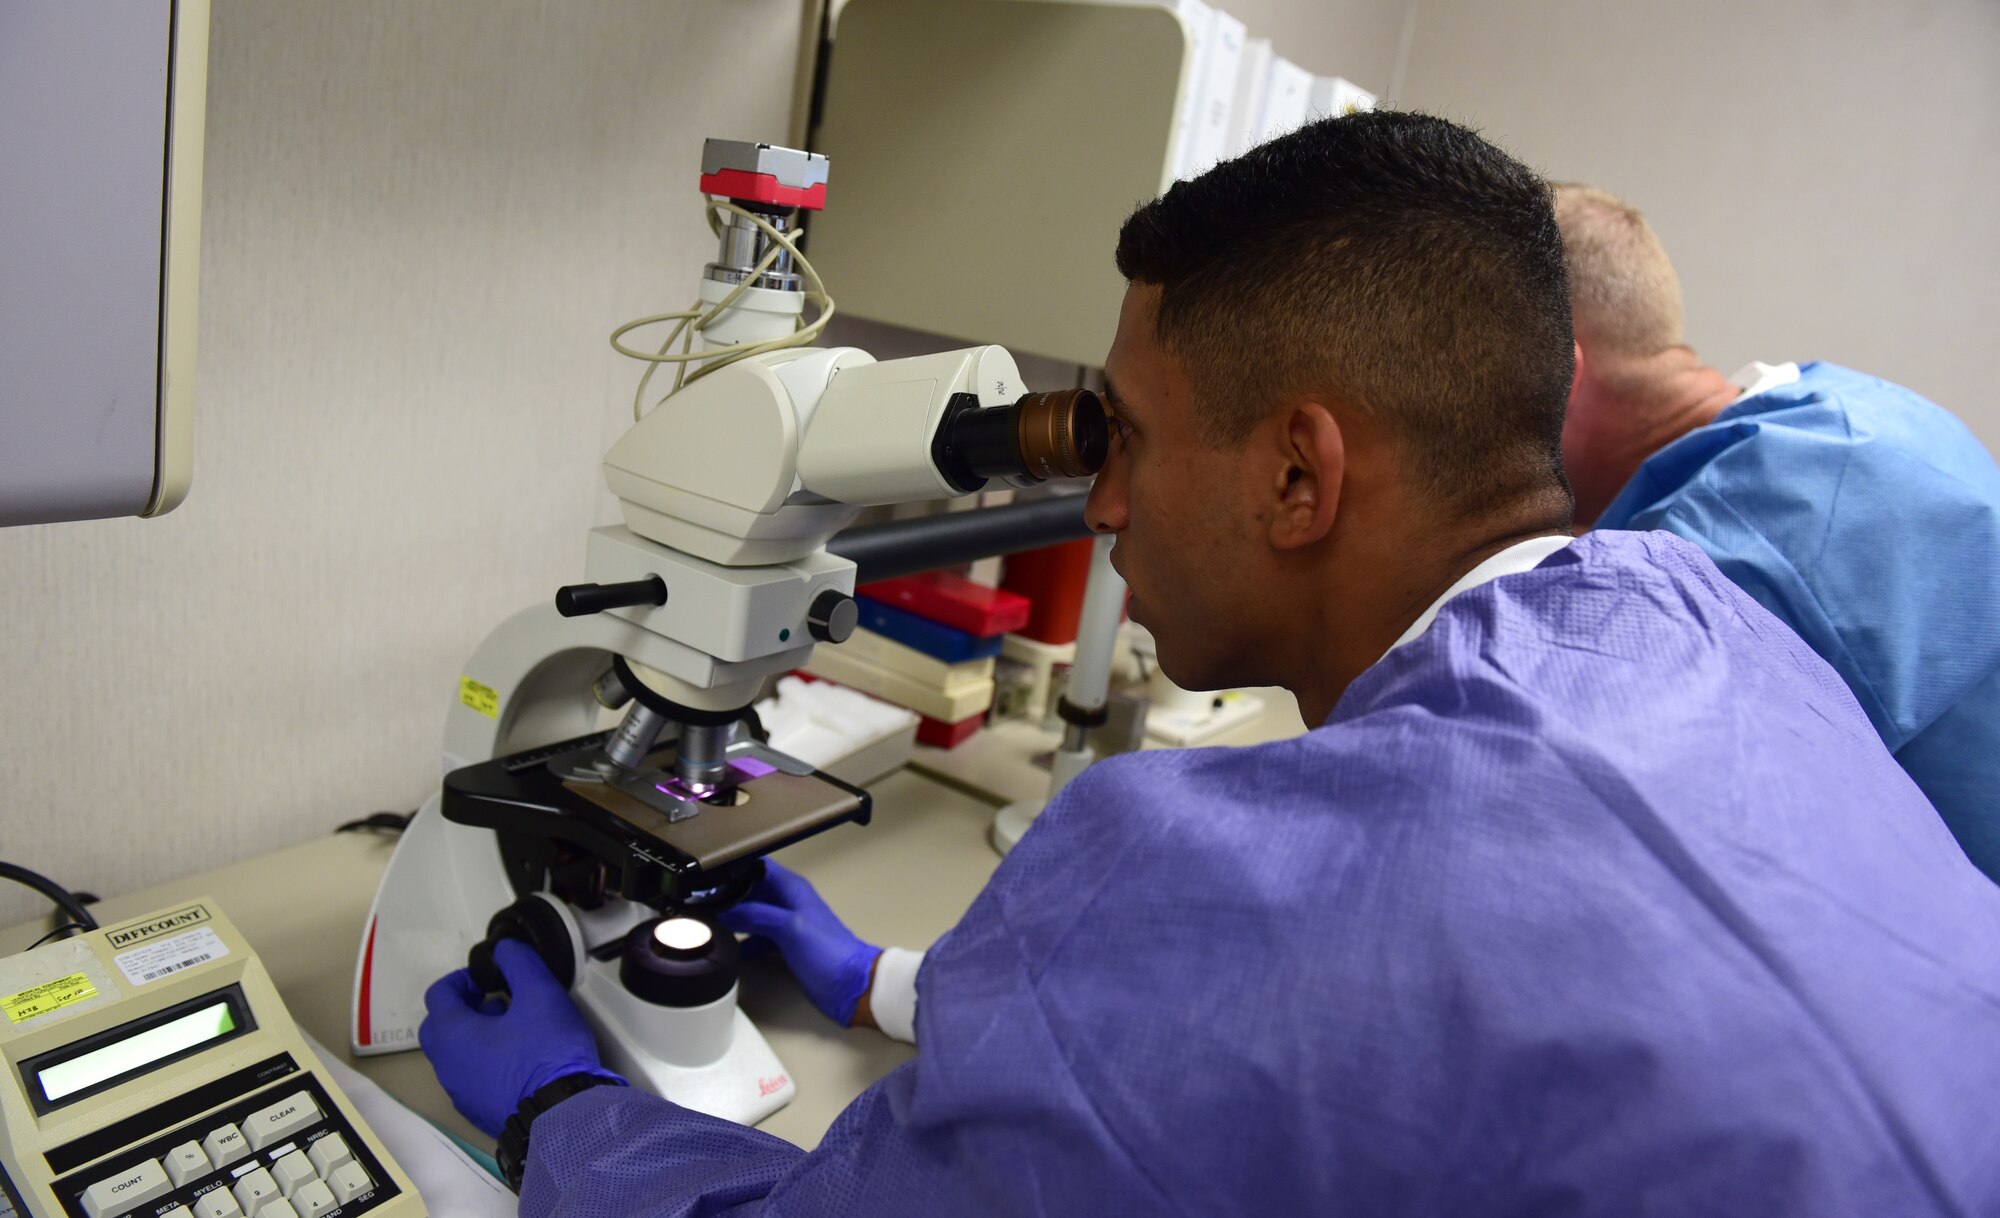 U.S. Air Force Staff Sgt. Jadow Hughes, 325th Medical Support Squadron laboratory technician, shows Col. Brian Laidlaw, 325th Fighter Wing commander how blood samples look under a microscope at Tyndall Air Force Base, Fla., Sept. 5, 2018. Medical laboratory specialists conduct state-of-the-art analysis that not only helps prevent and treat disease, but is essential to detecting agents that indicate biological warfare. (U.S. Air Force photo by Senior Airman Cody R. Miller)